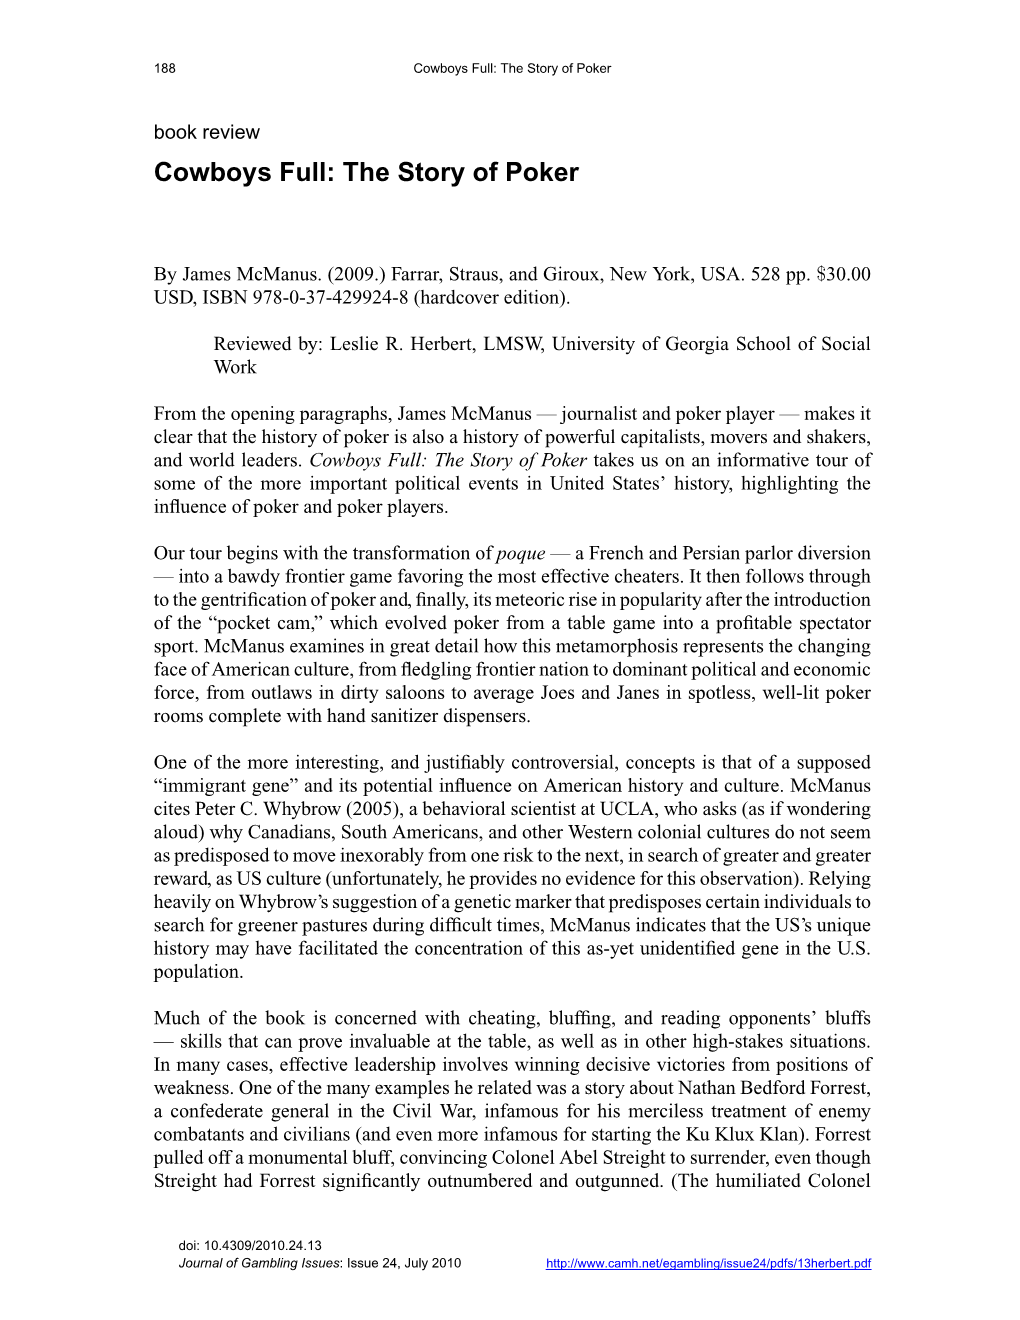 Cowboys Full: the Story of Poker Book Review Cowboys Full: the Story of Poker